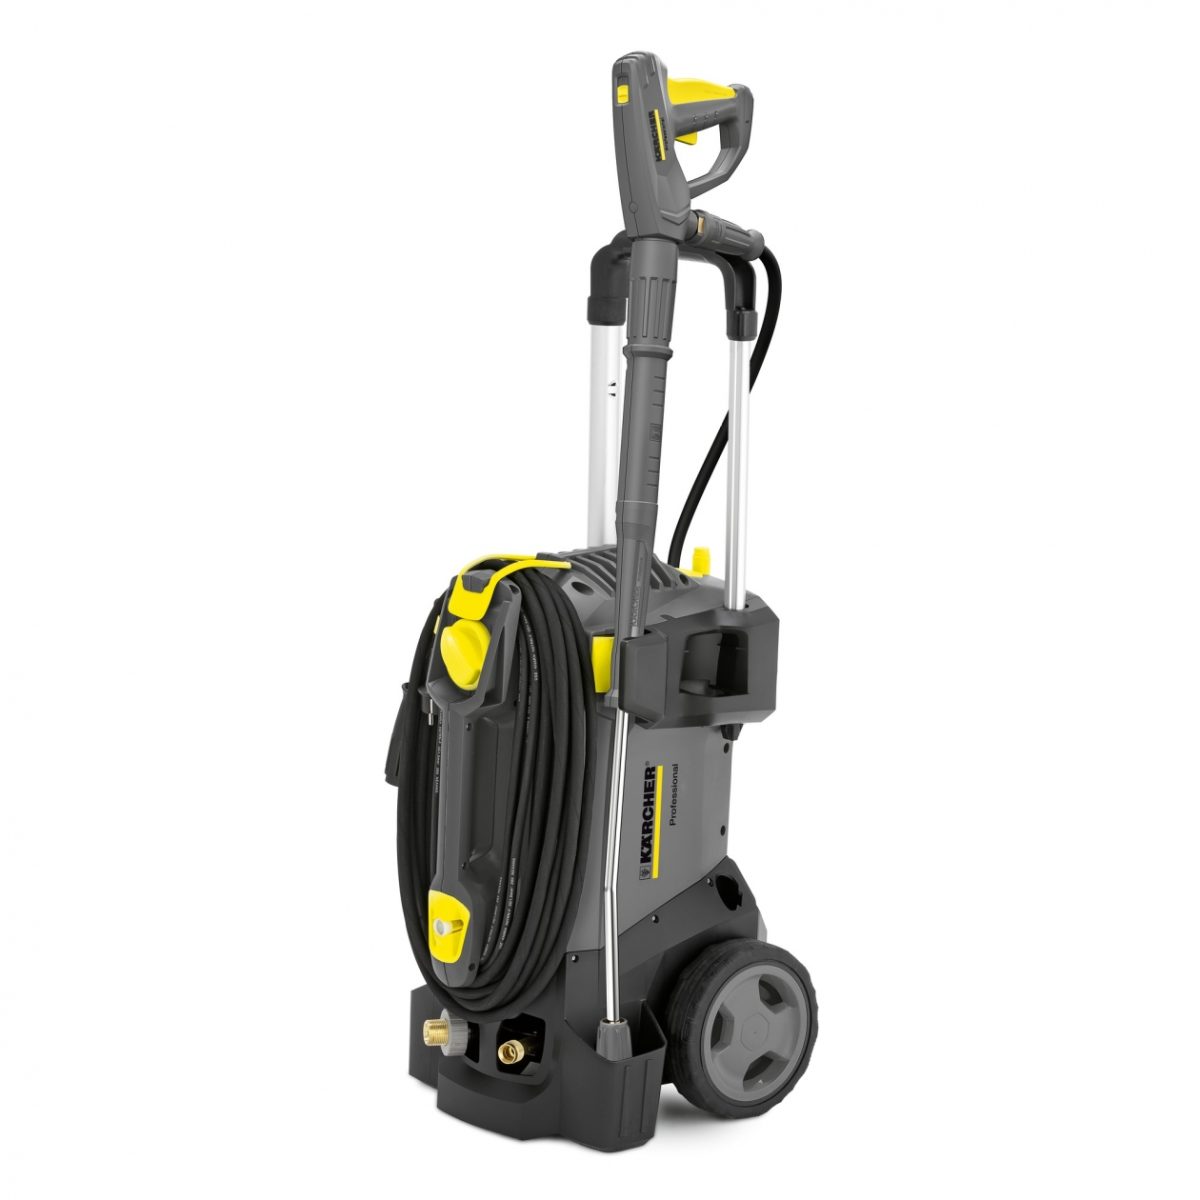 PLUS Cold Water Pressure Washer Inc Dirtblaster